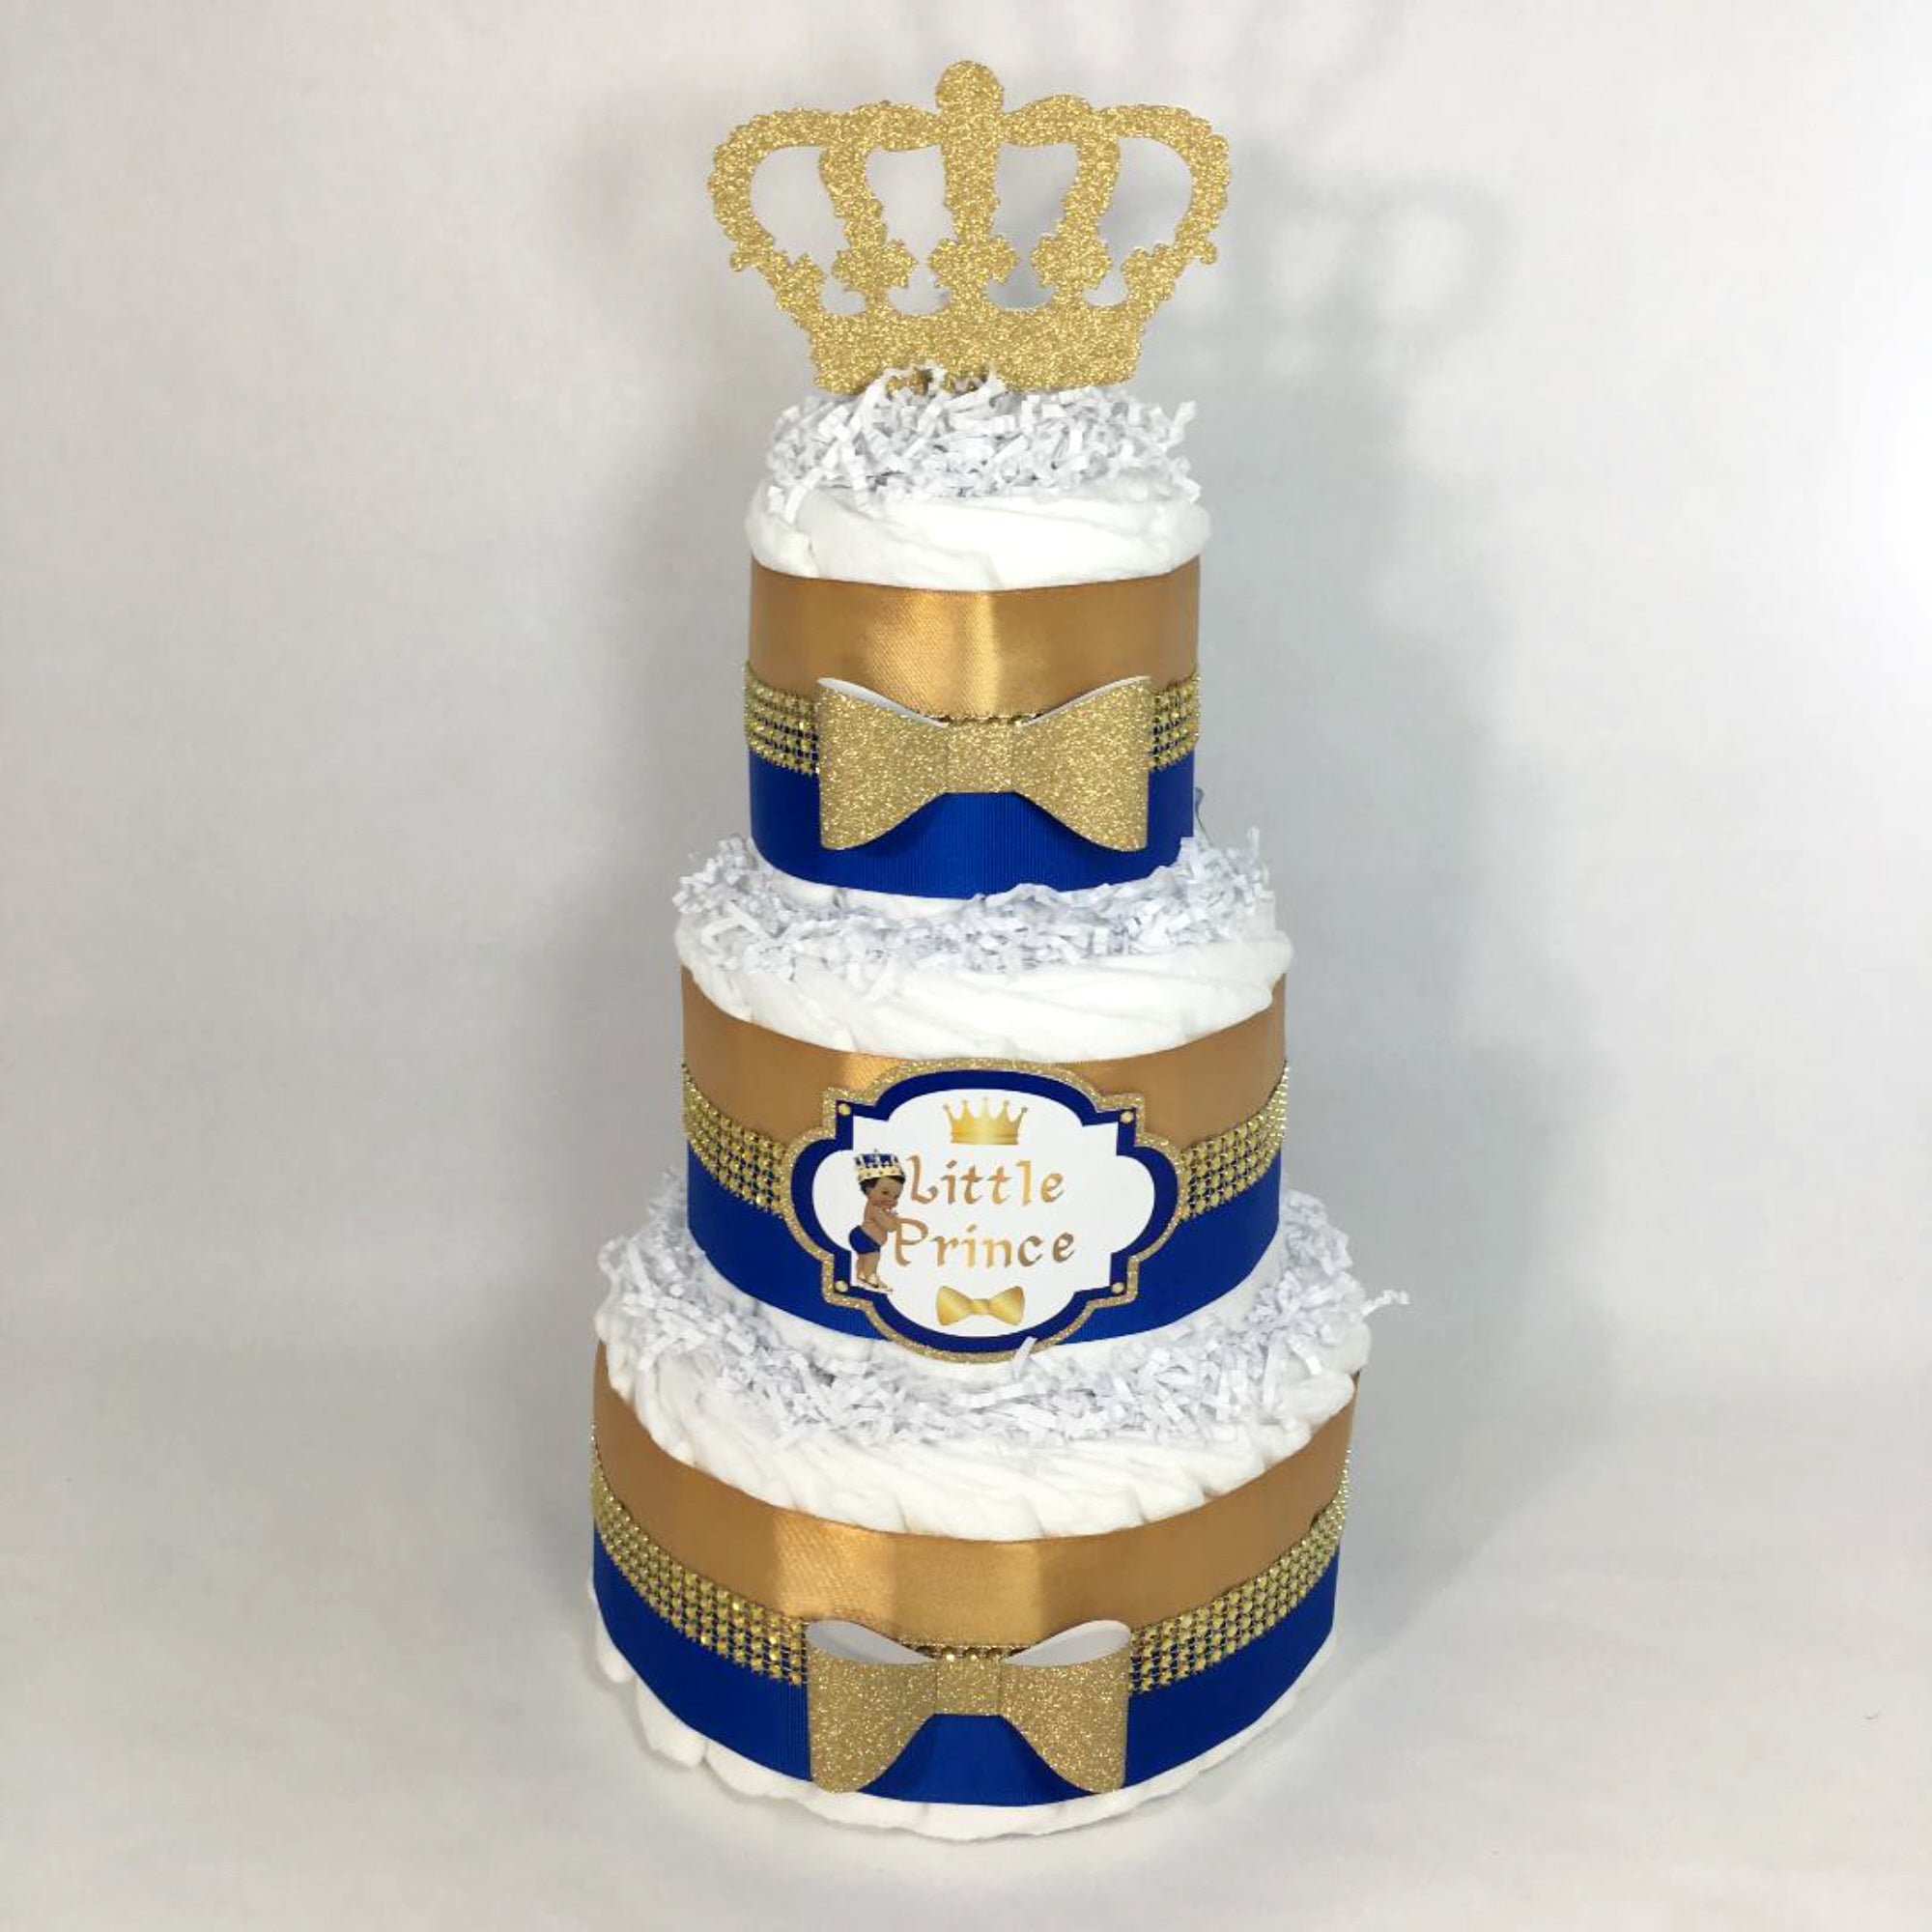 Blue & Gold Cake Decoration Ideas 2022/Royal Blue And Gold Cake/Birthday  Cake Ideas/Anniversary Cake - YouTube